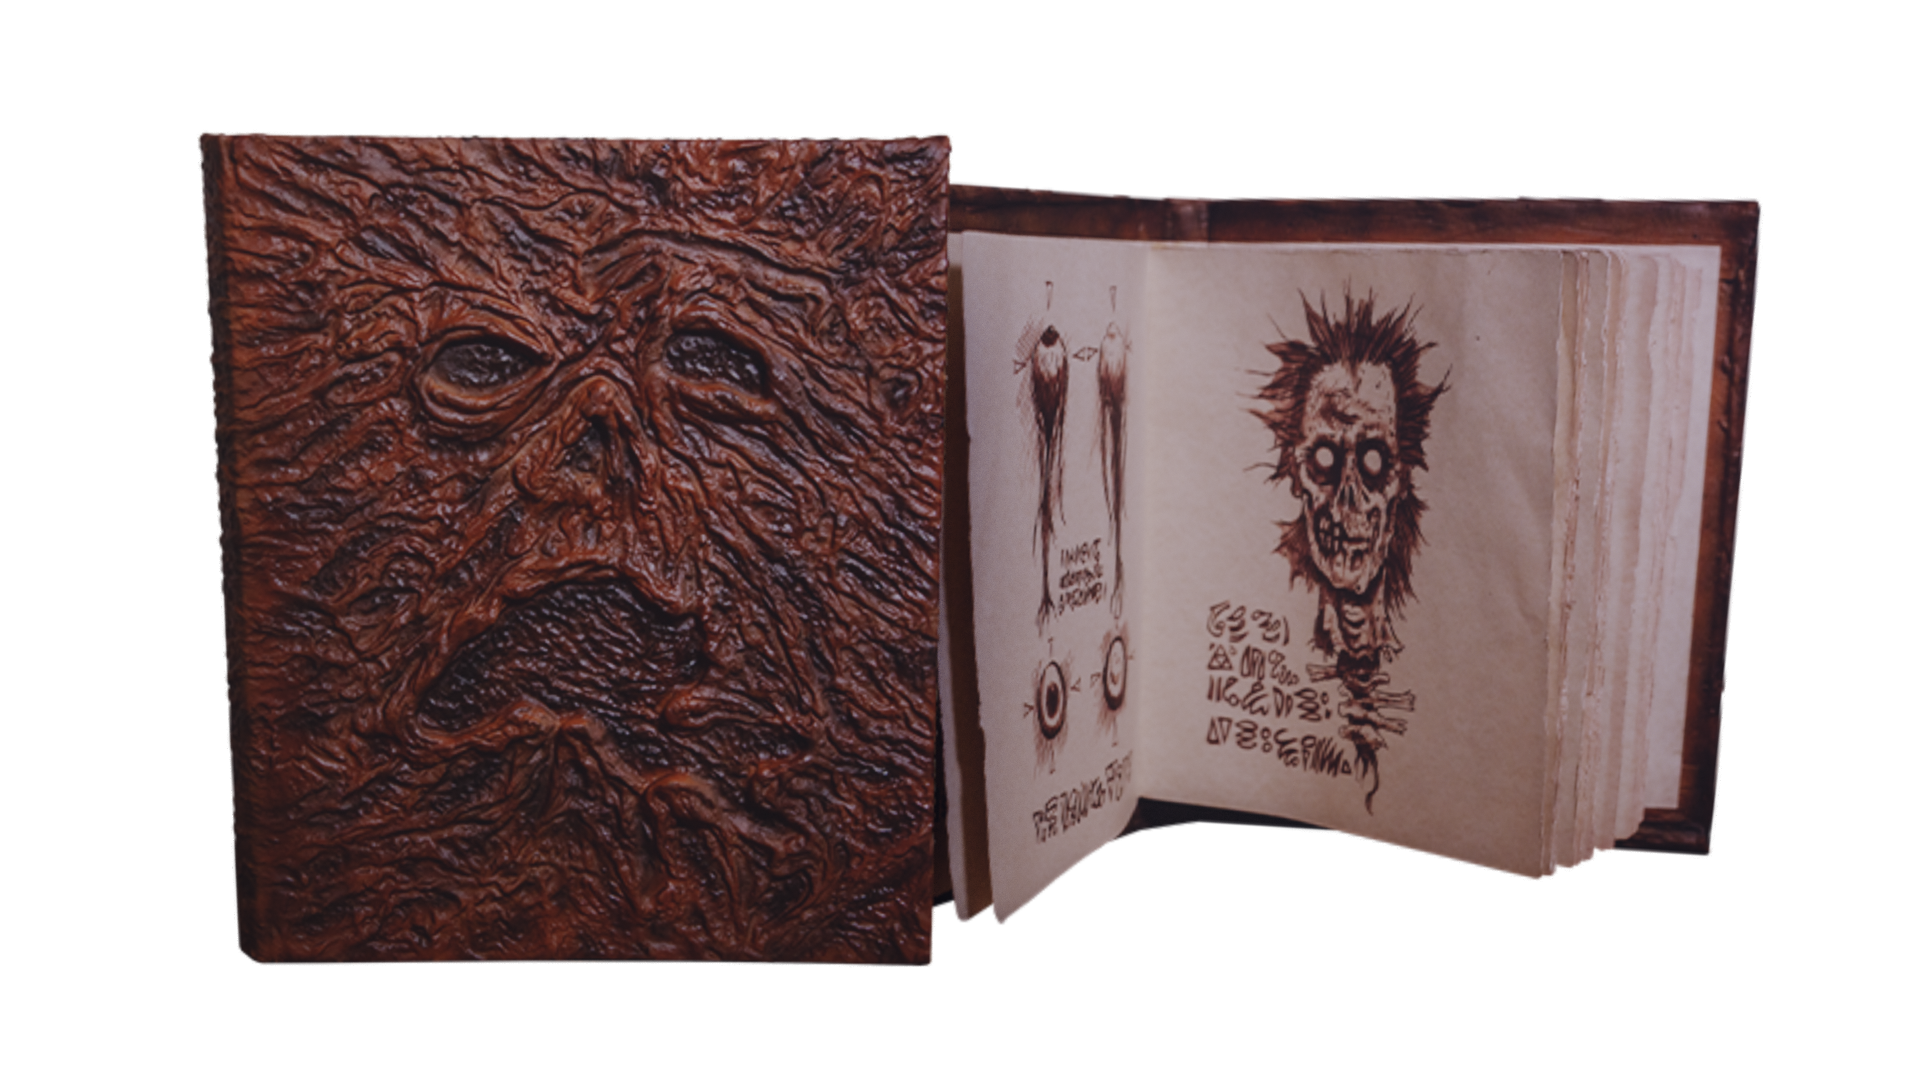 Evil Dead: The Game collector's editions are now up for pre-orders